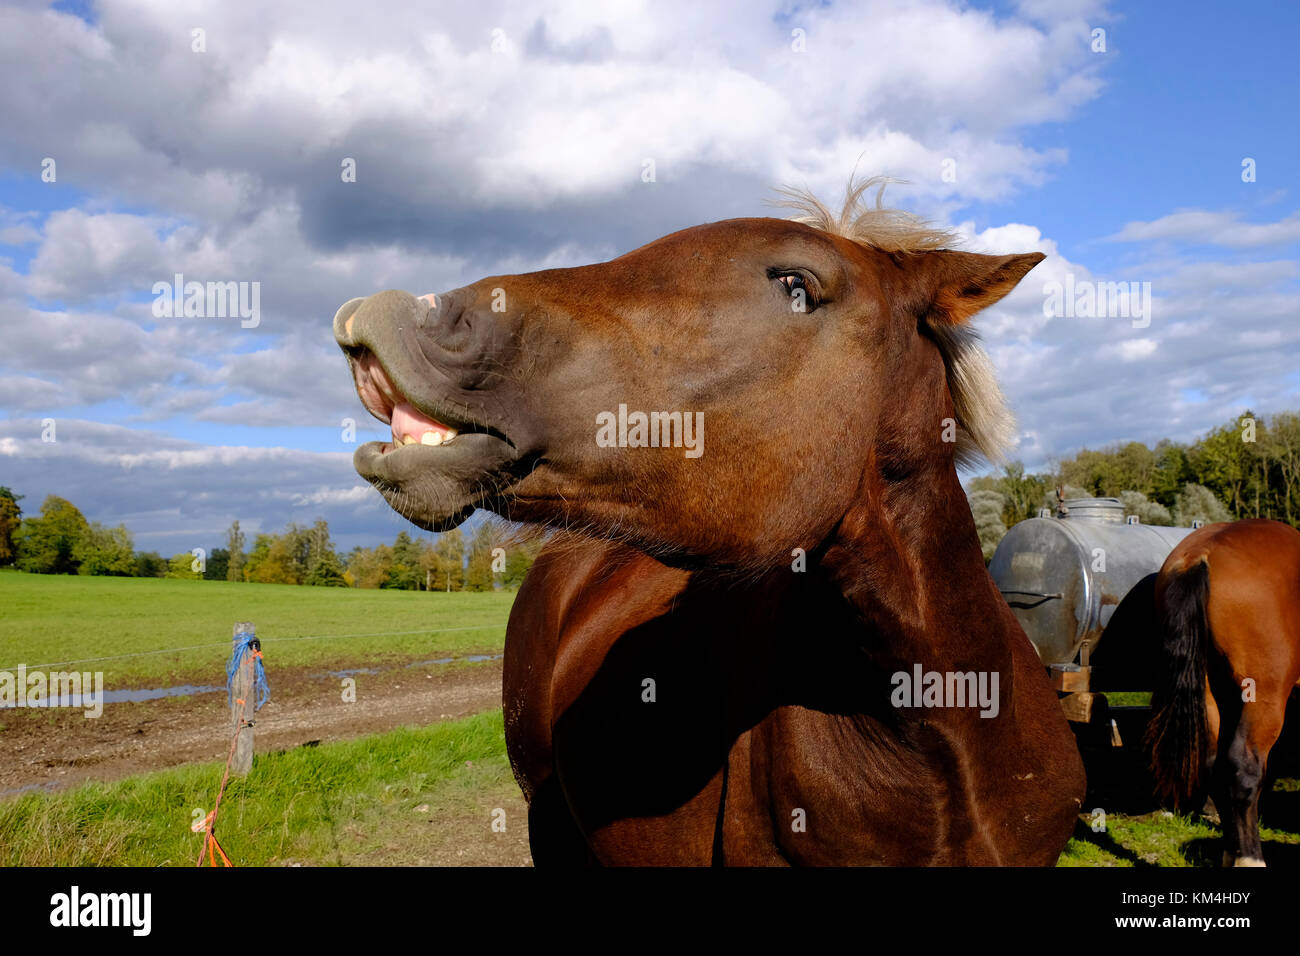 Laughing horse. Stock Photo